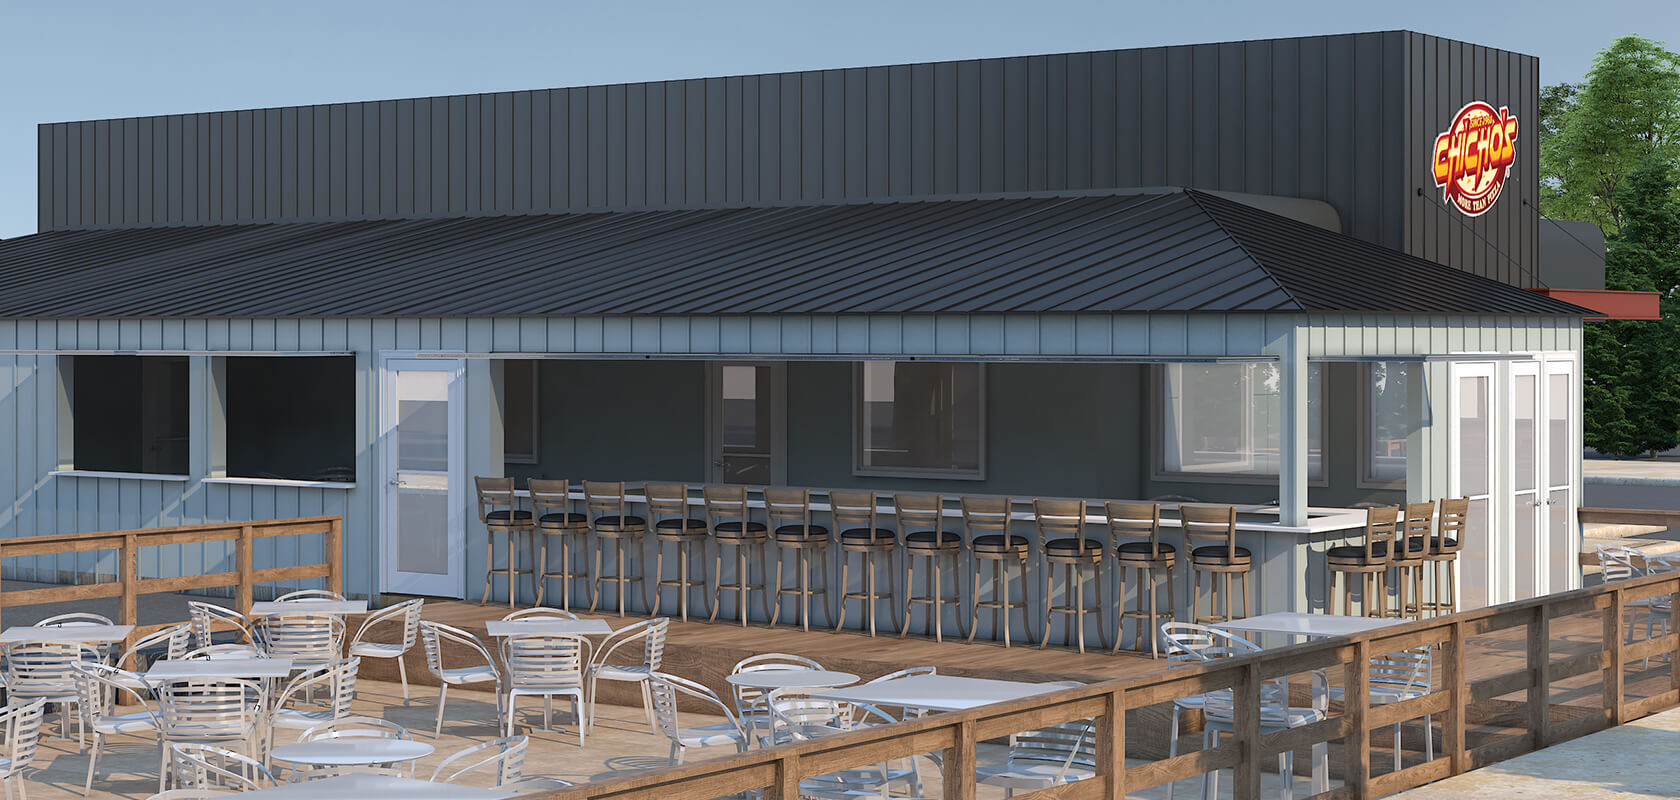 Chicho’s at Granby rendering visualization